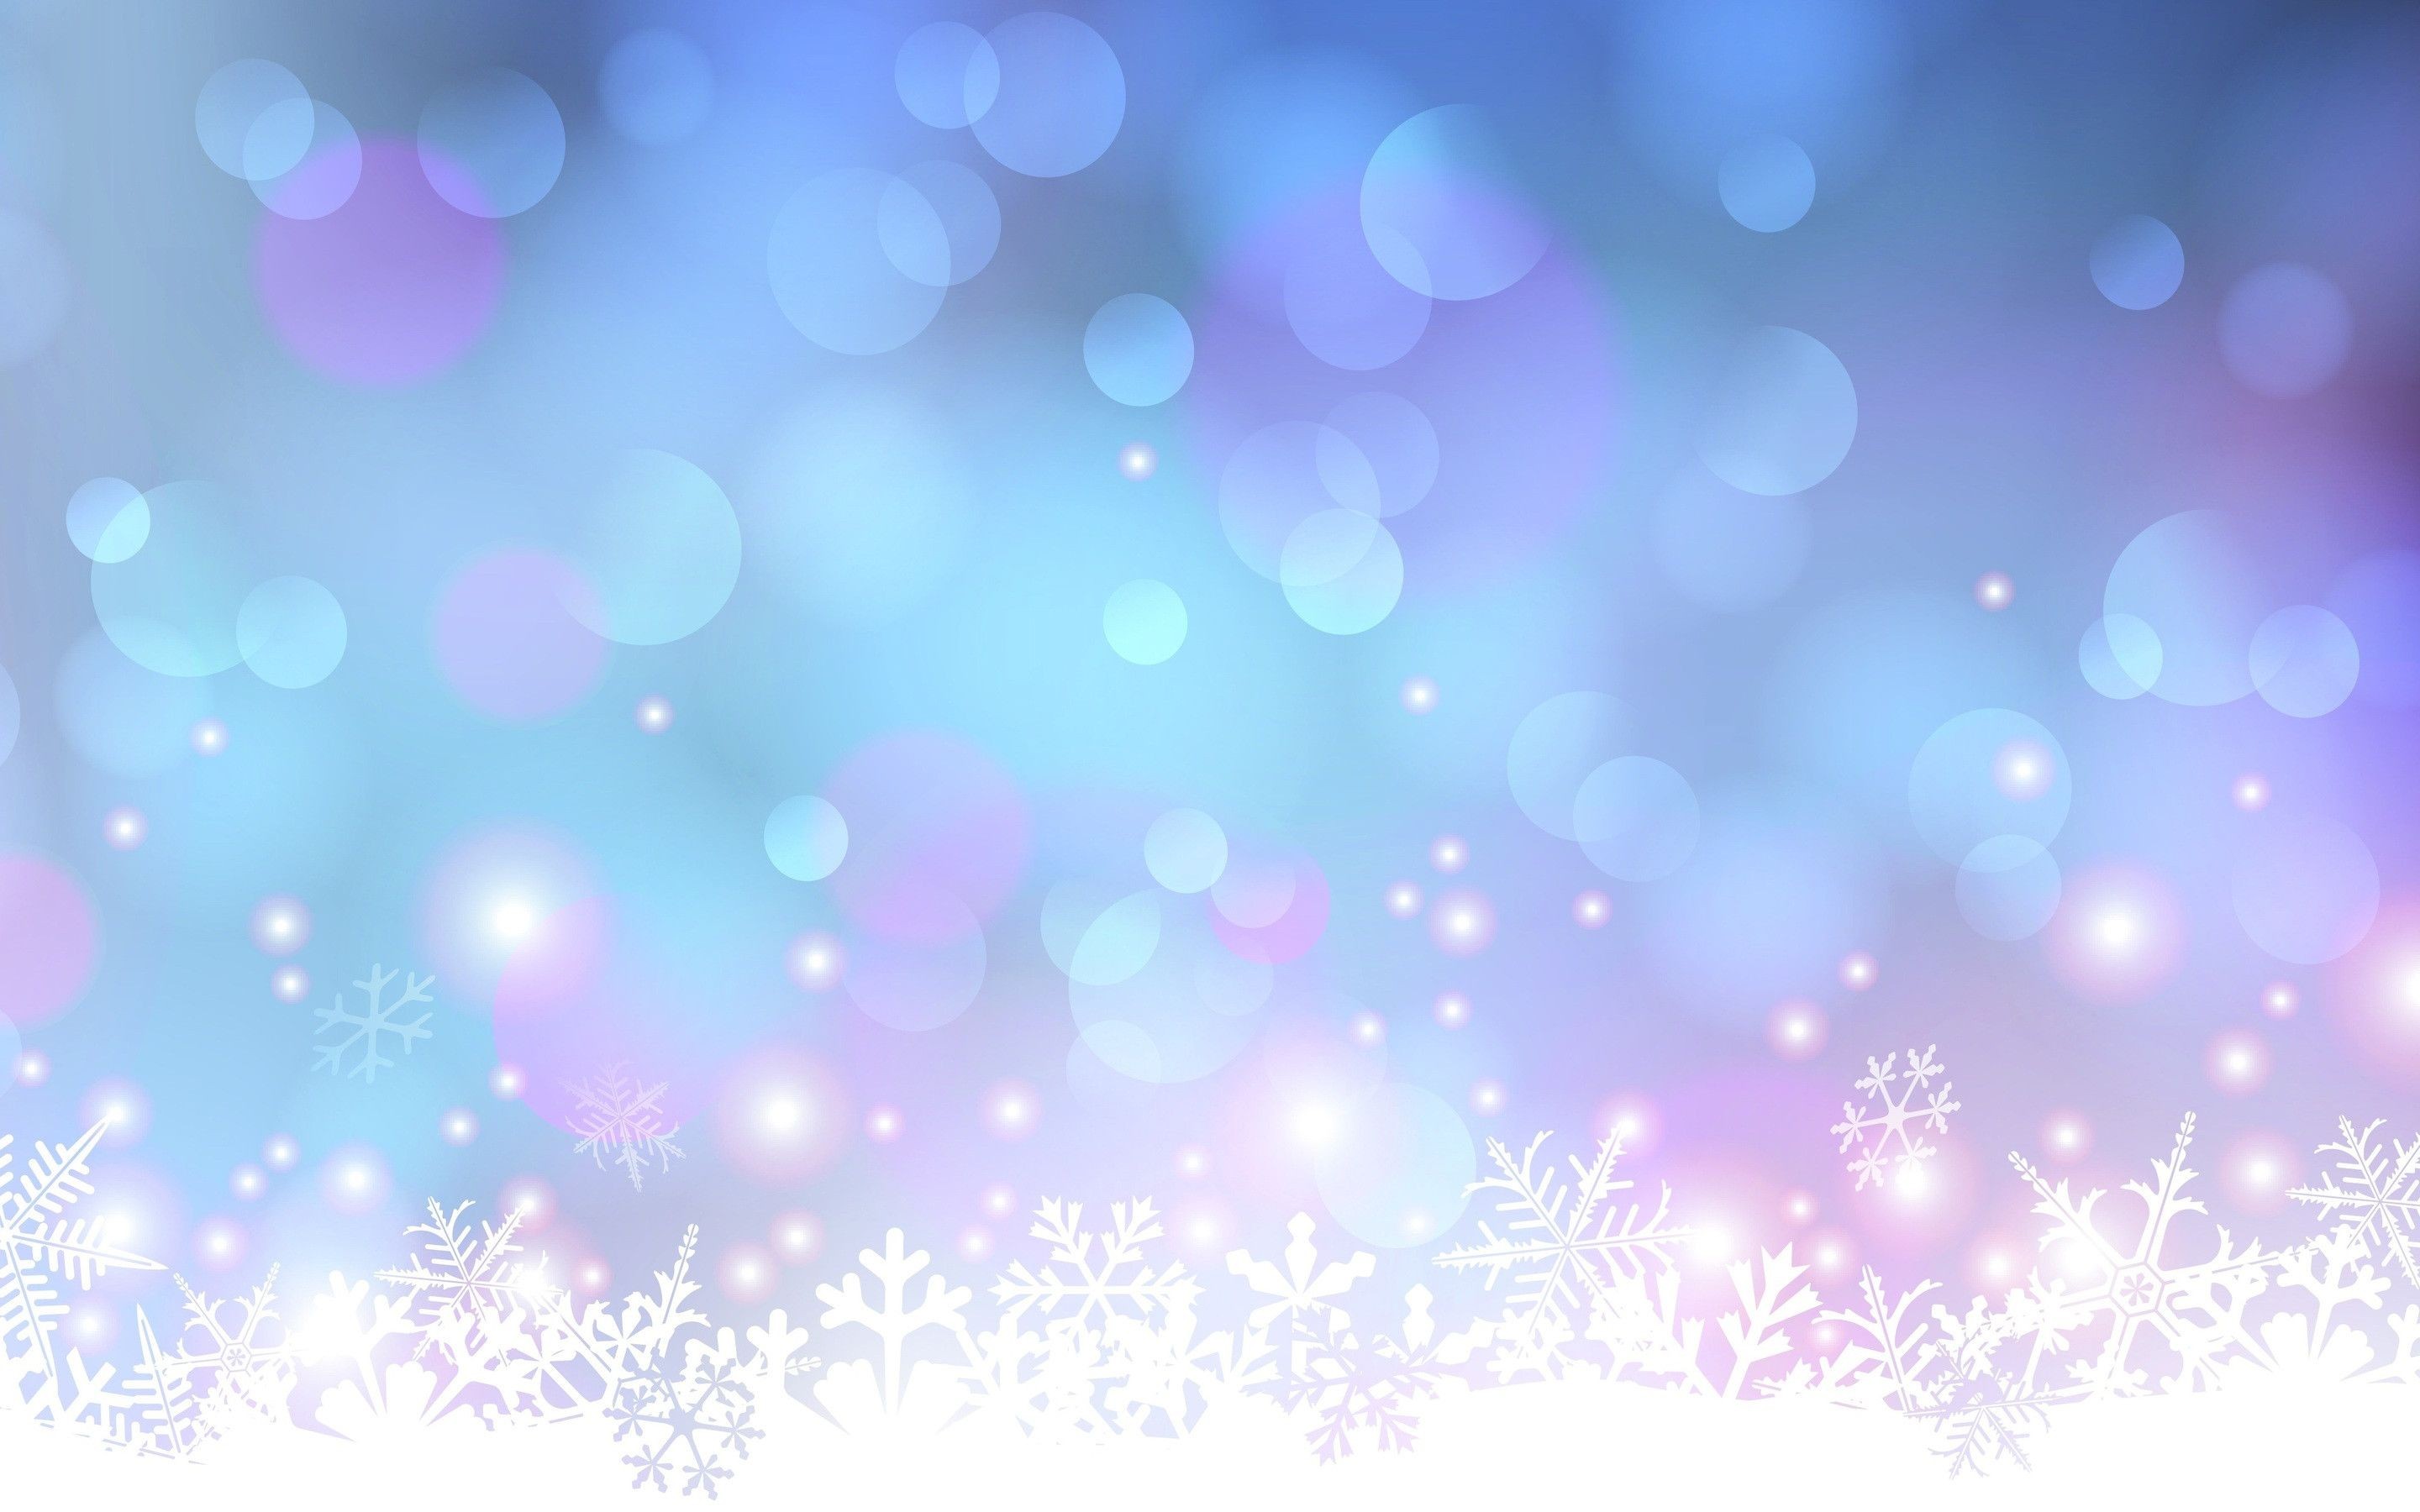 Free Holiday Wallpaper For Computer 85 images in Collection Page 2 2880x1800